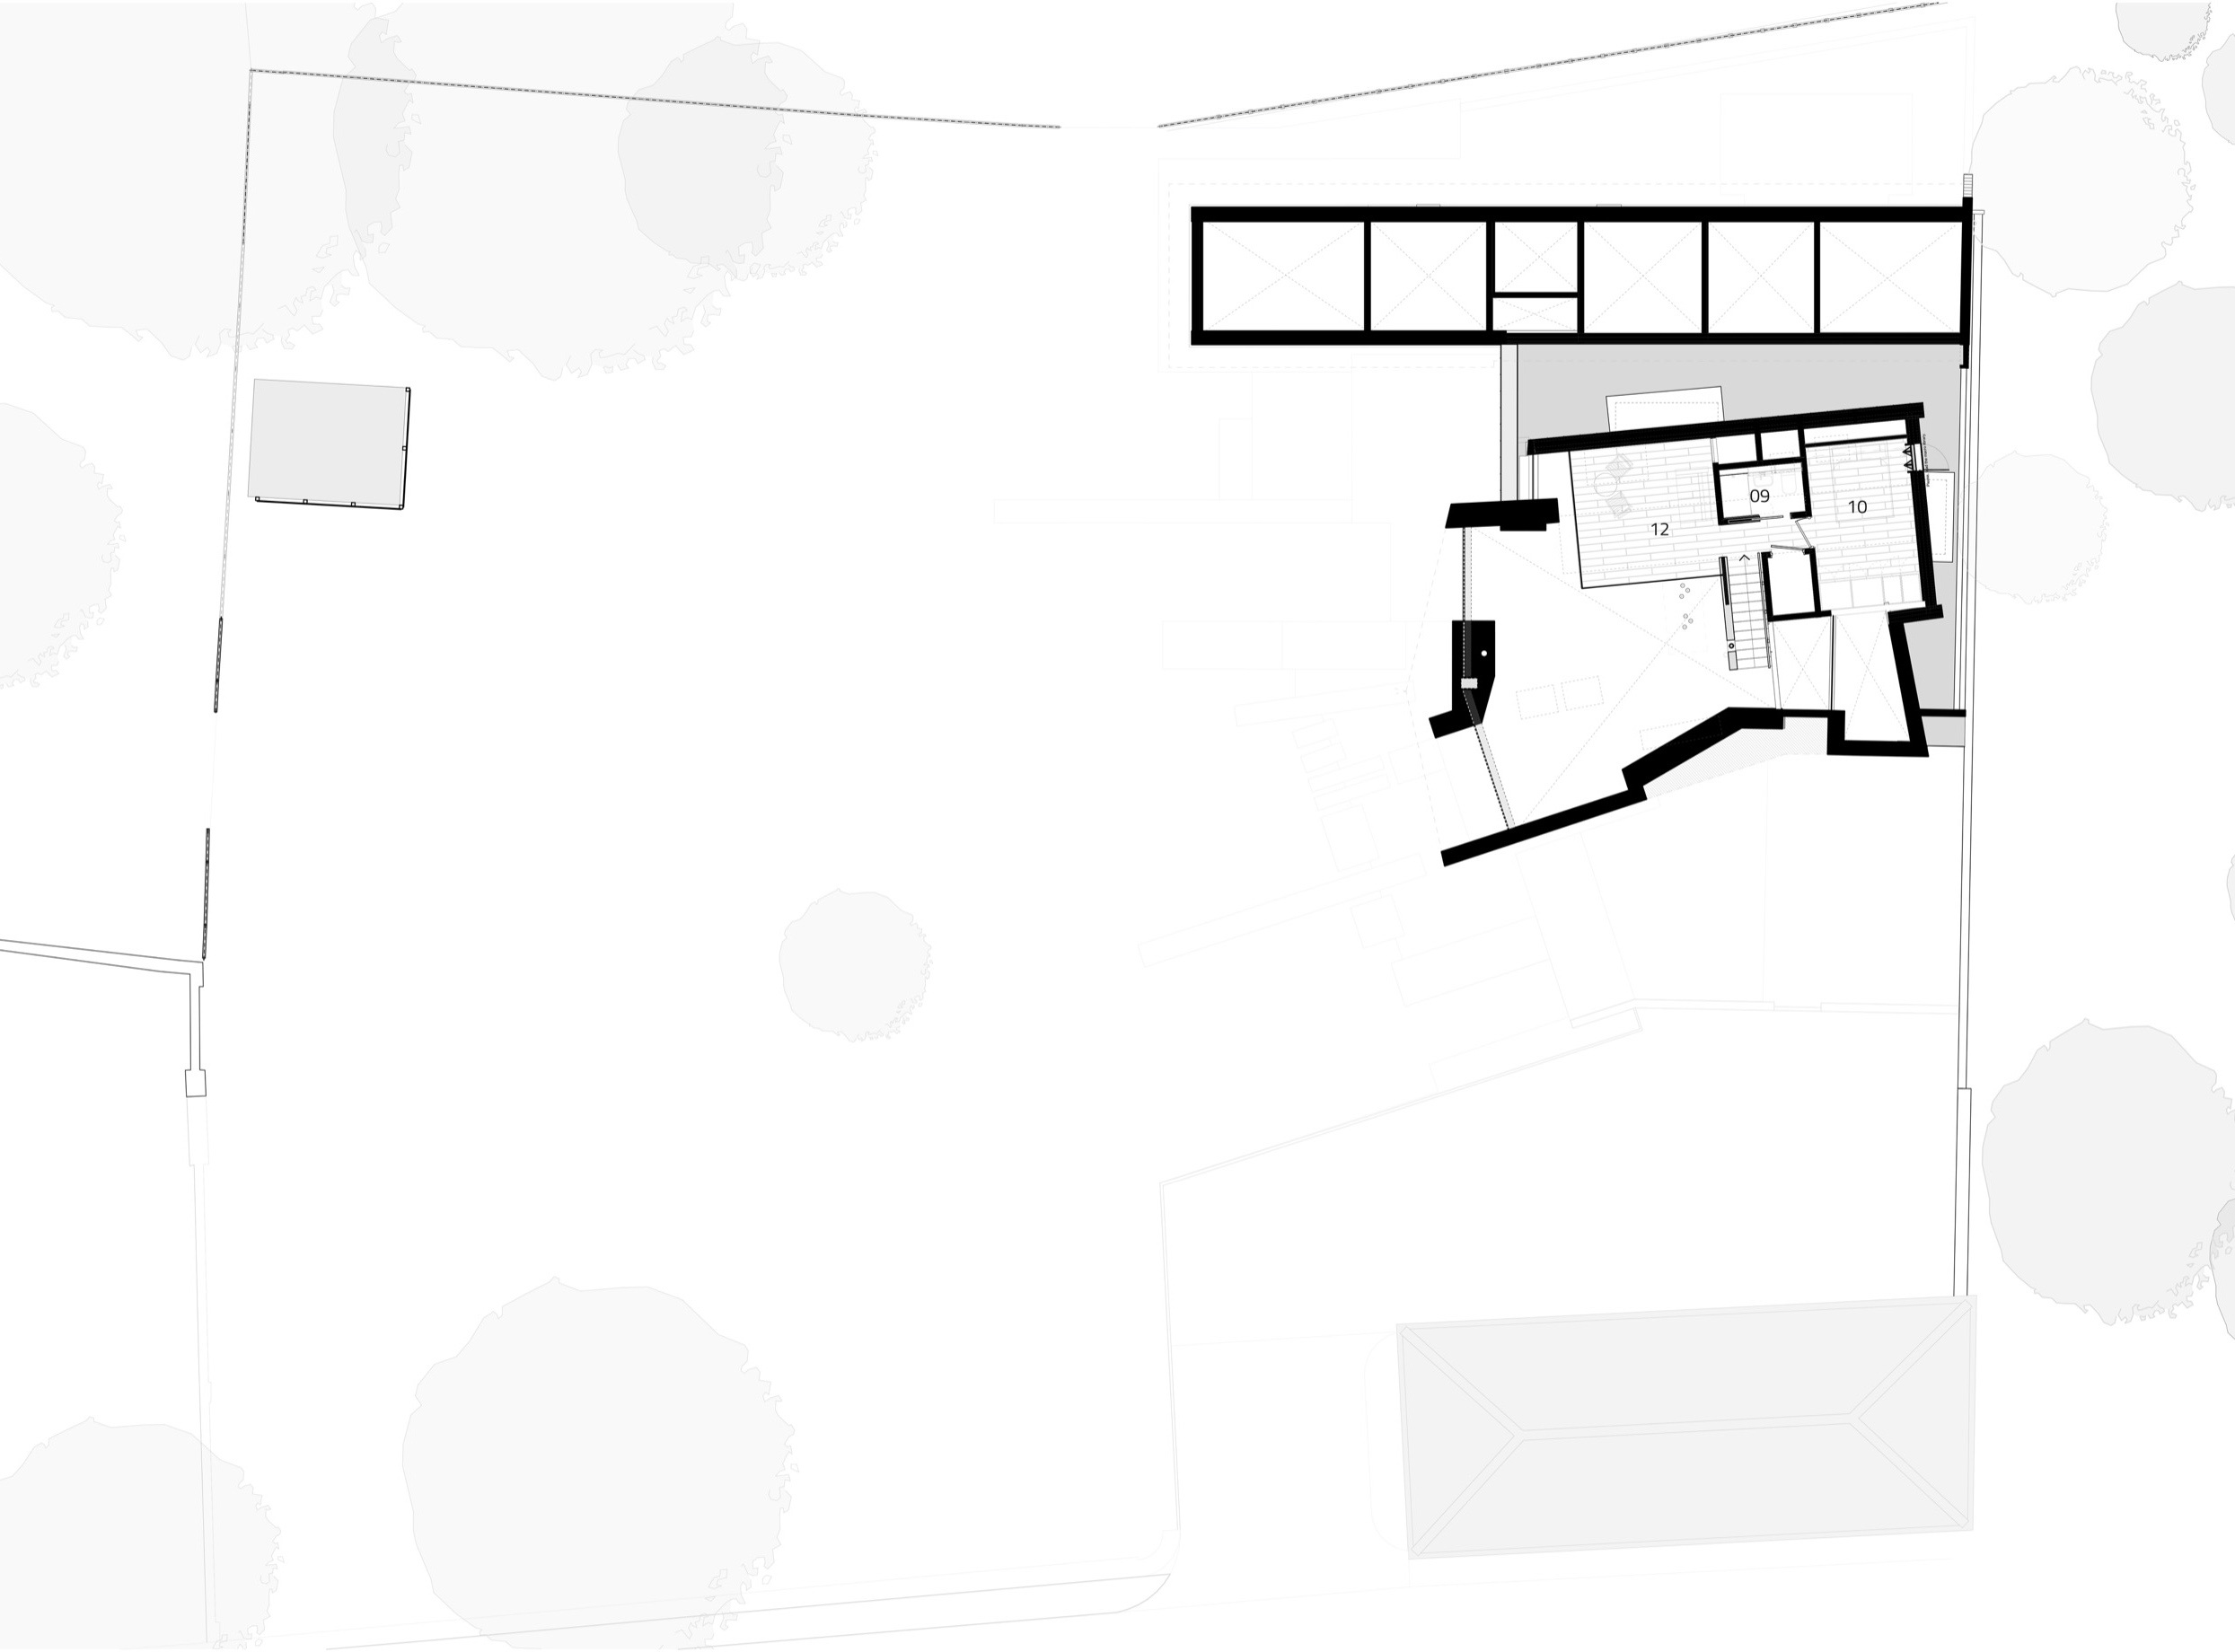 Architecture first floor plan drawing of house | cdc studio cambridge architects